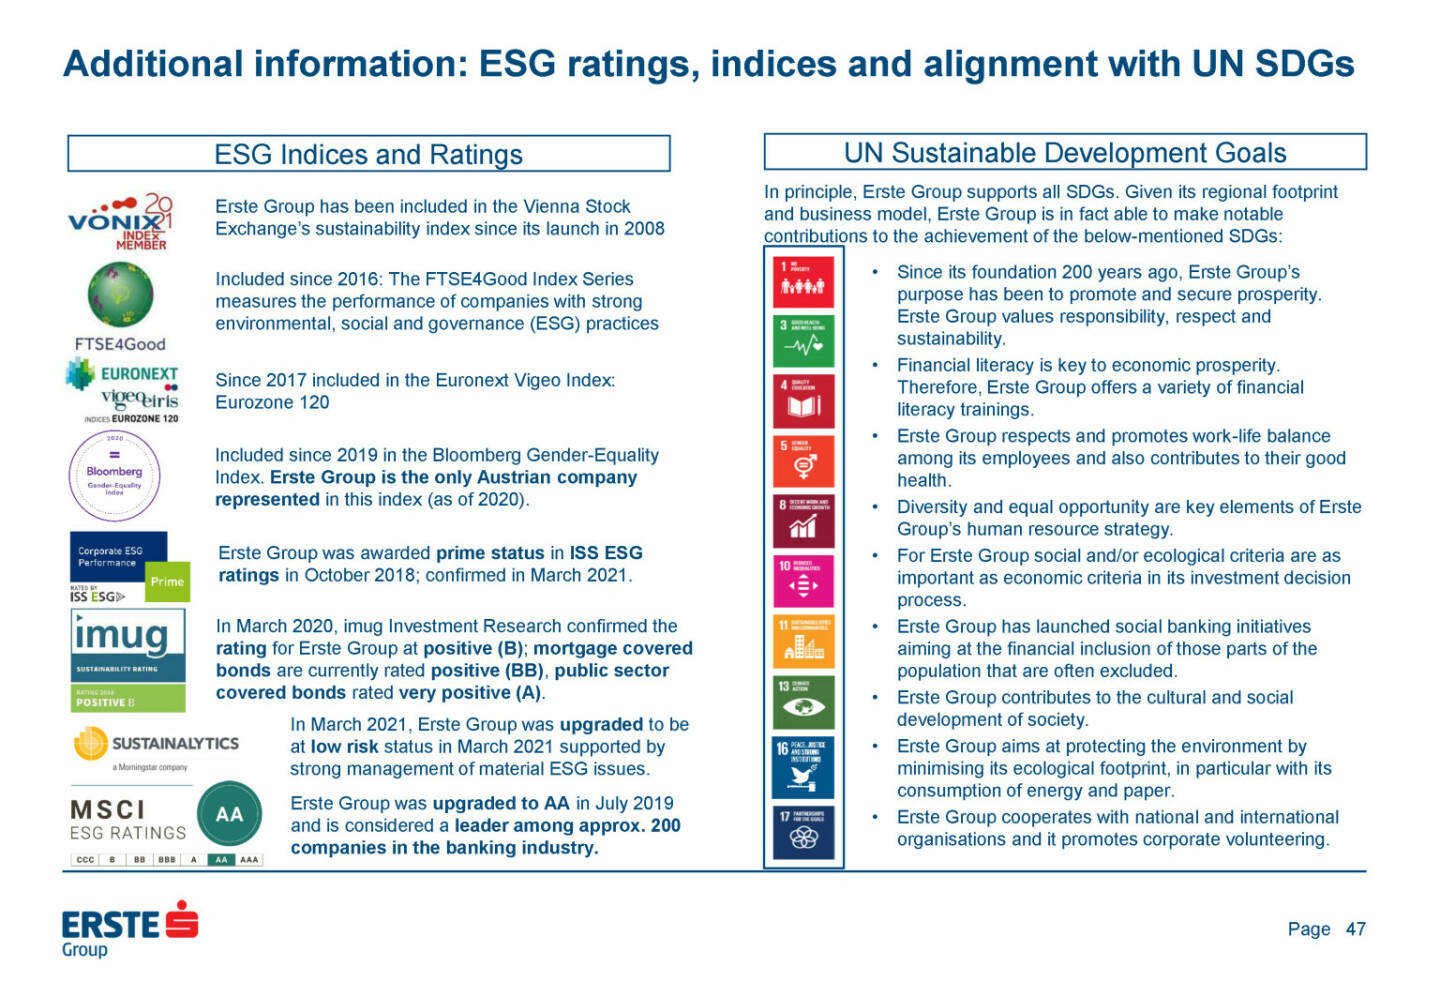 Erste Group - Additional information: ESG ratings, indices and alignment with UN SDGs